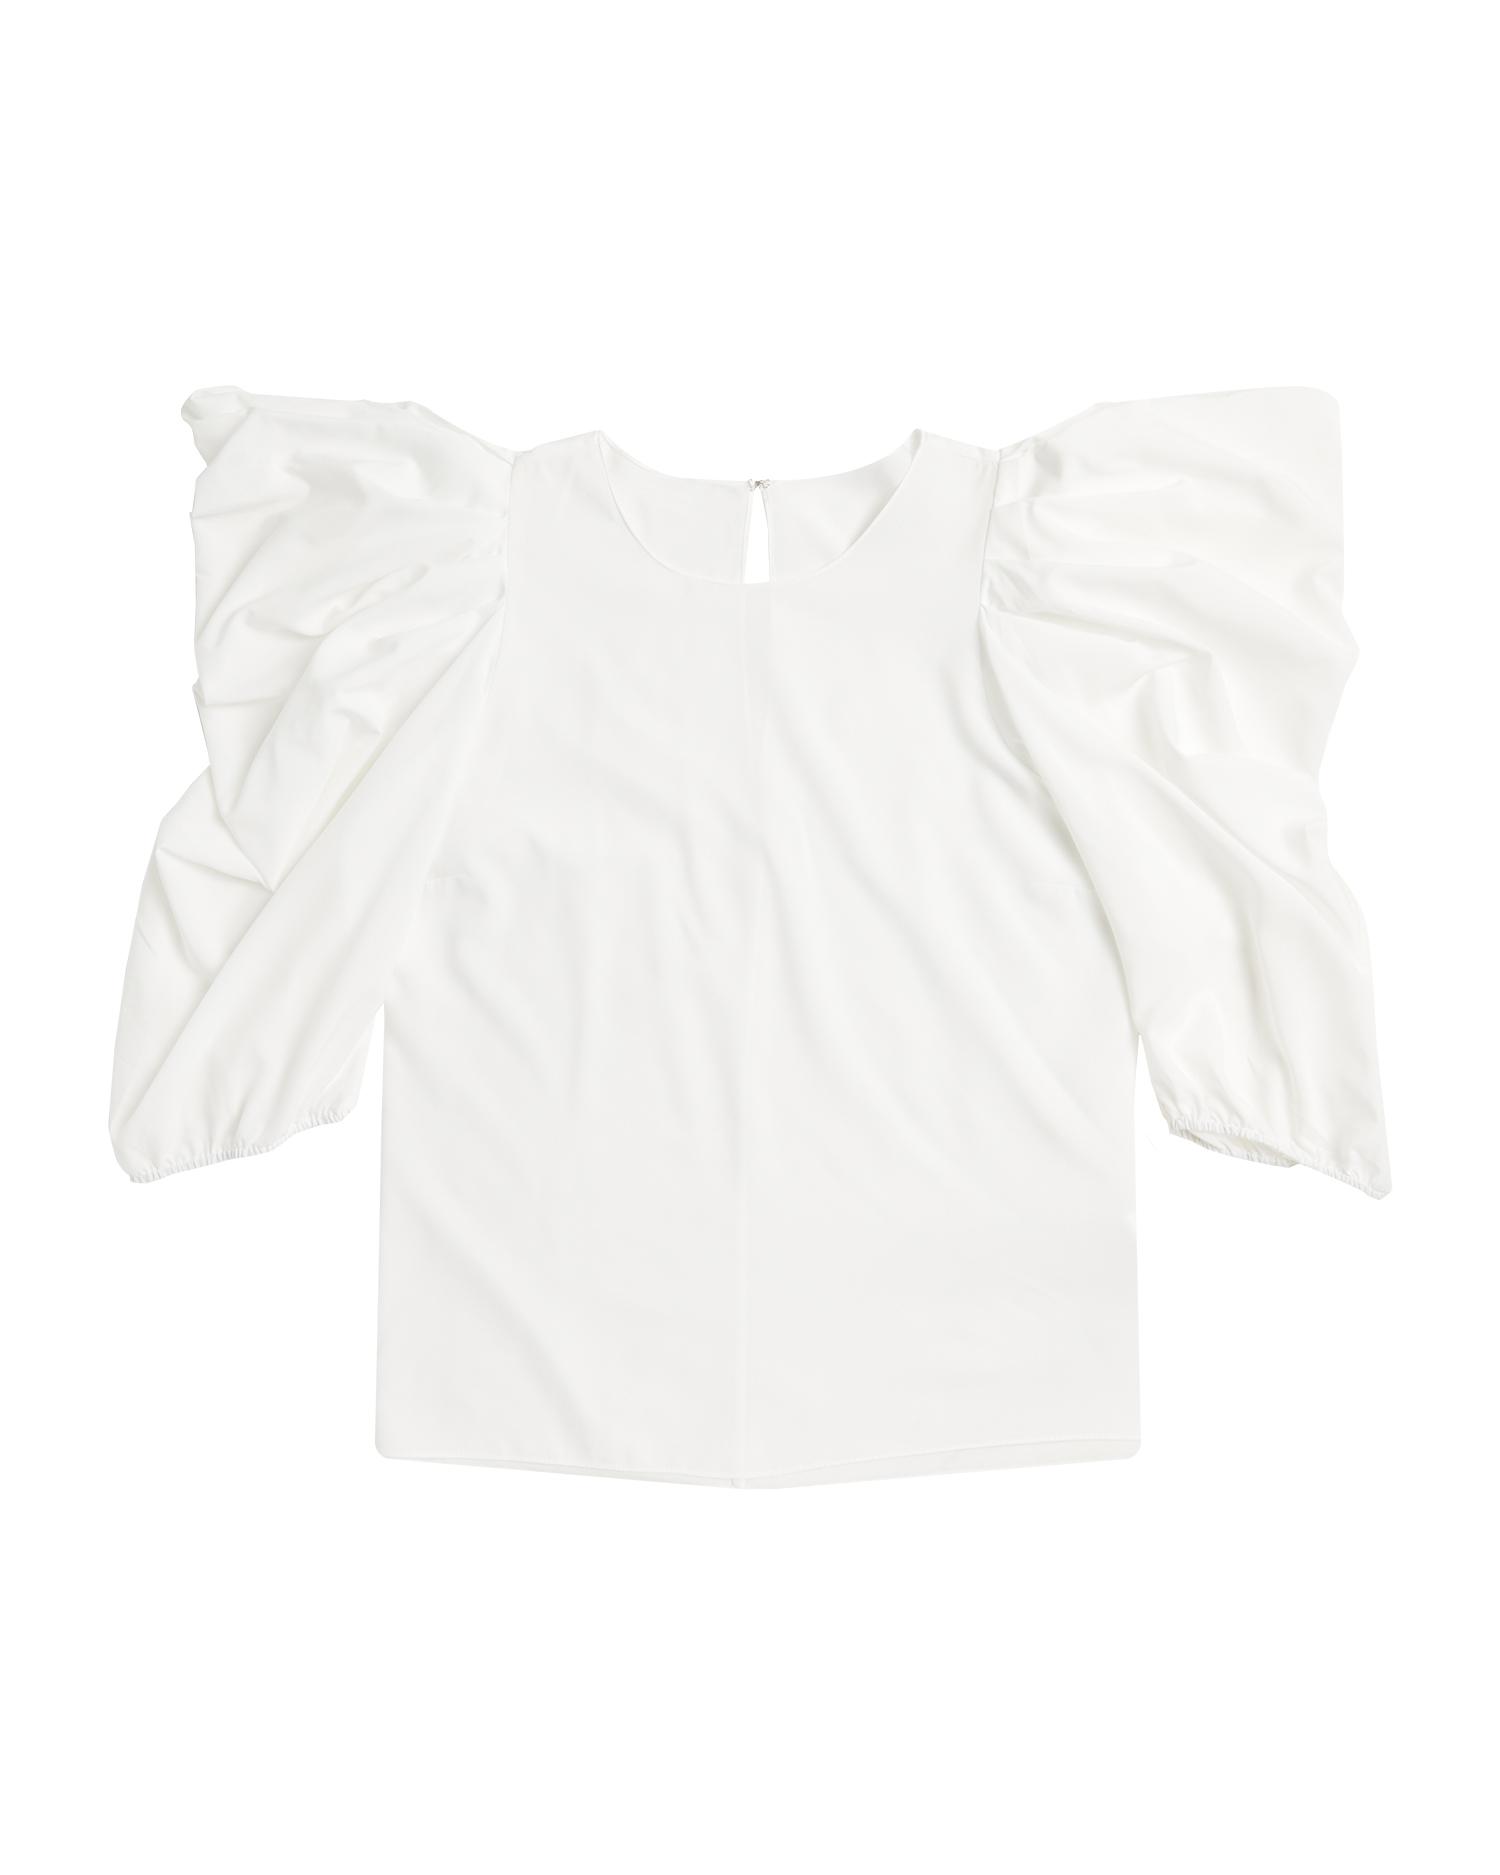 Valerie short sleeve top by DESIGNERS REMIX